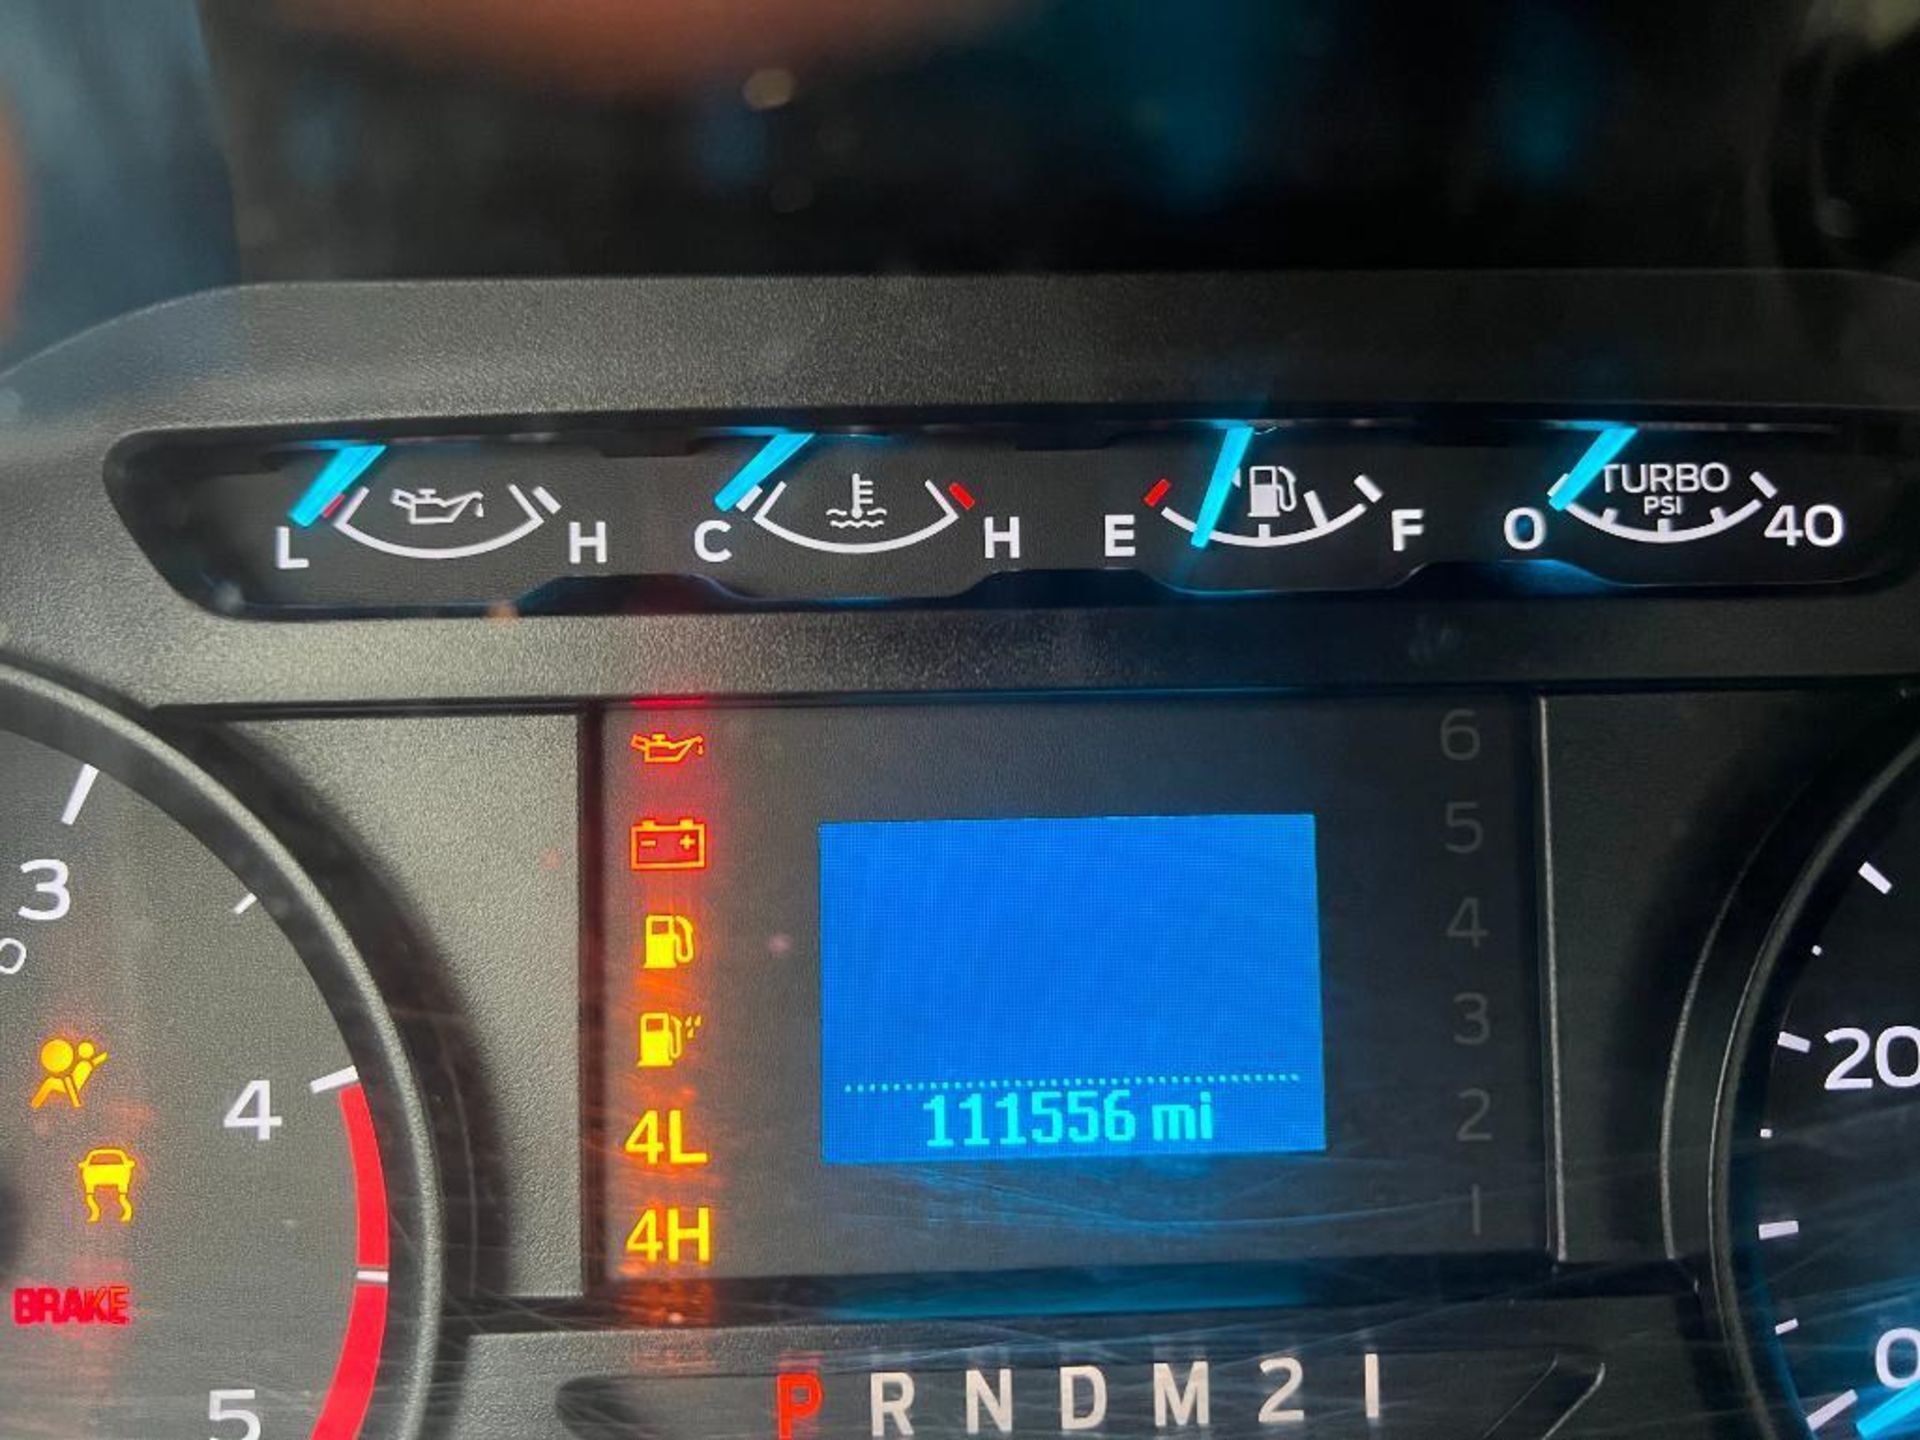 2019 Ford F550 4X4 Crew Cab Truck, VIN #1FD0W5HT1KEE51904, Miles 111,556, 6-Speed Automatic Transmis - Image 8 of 29